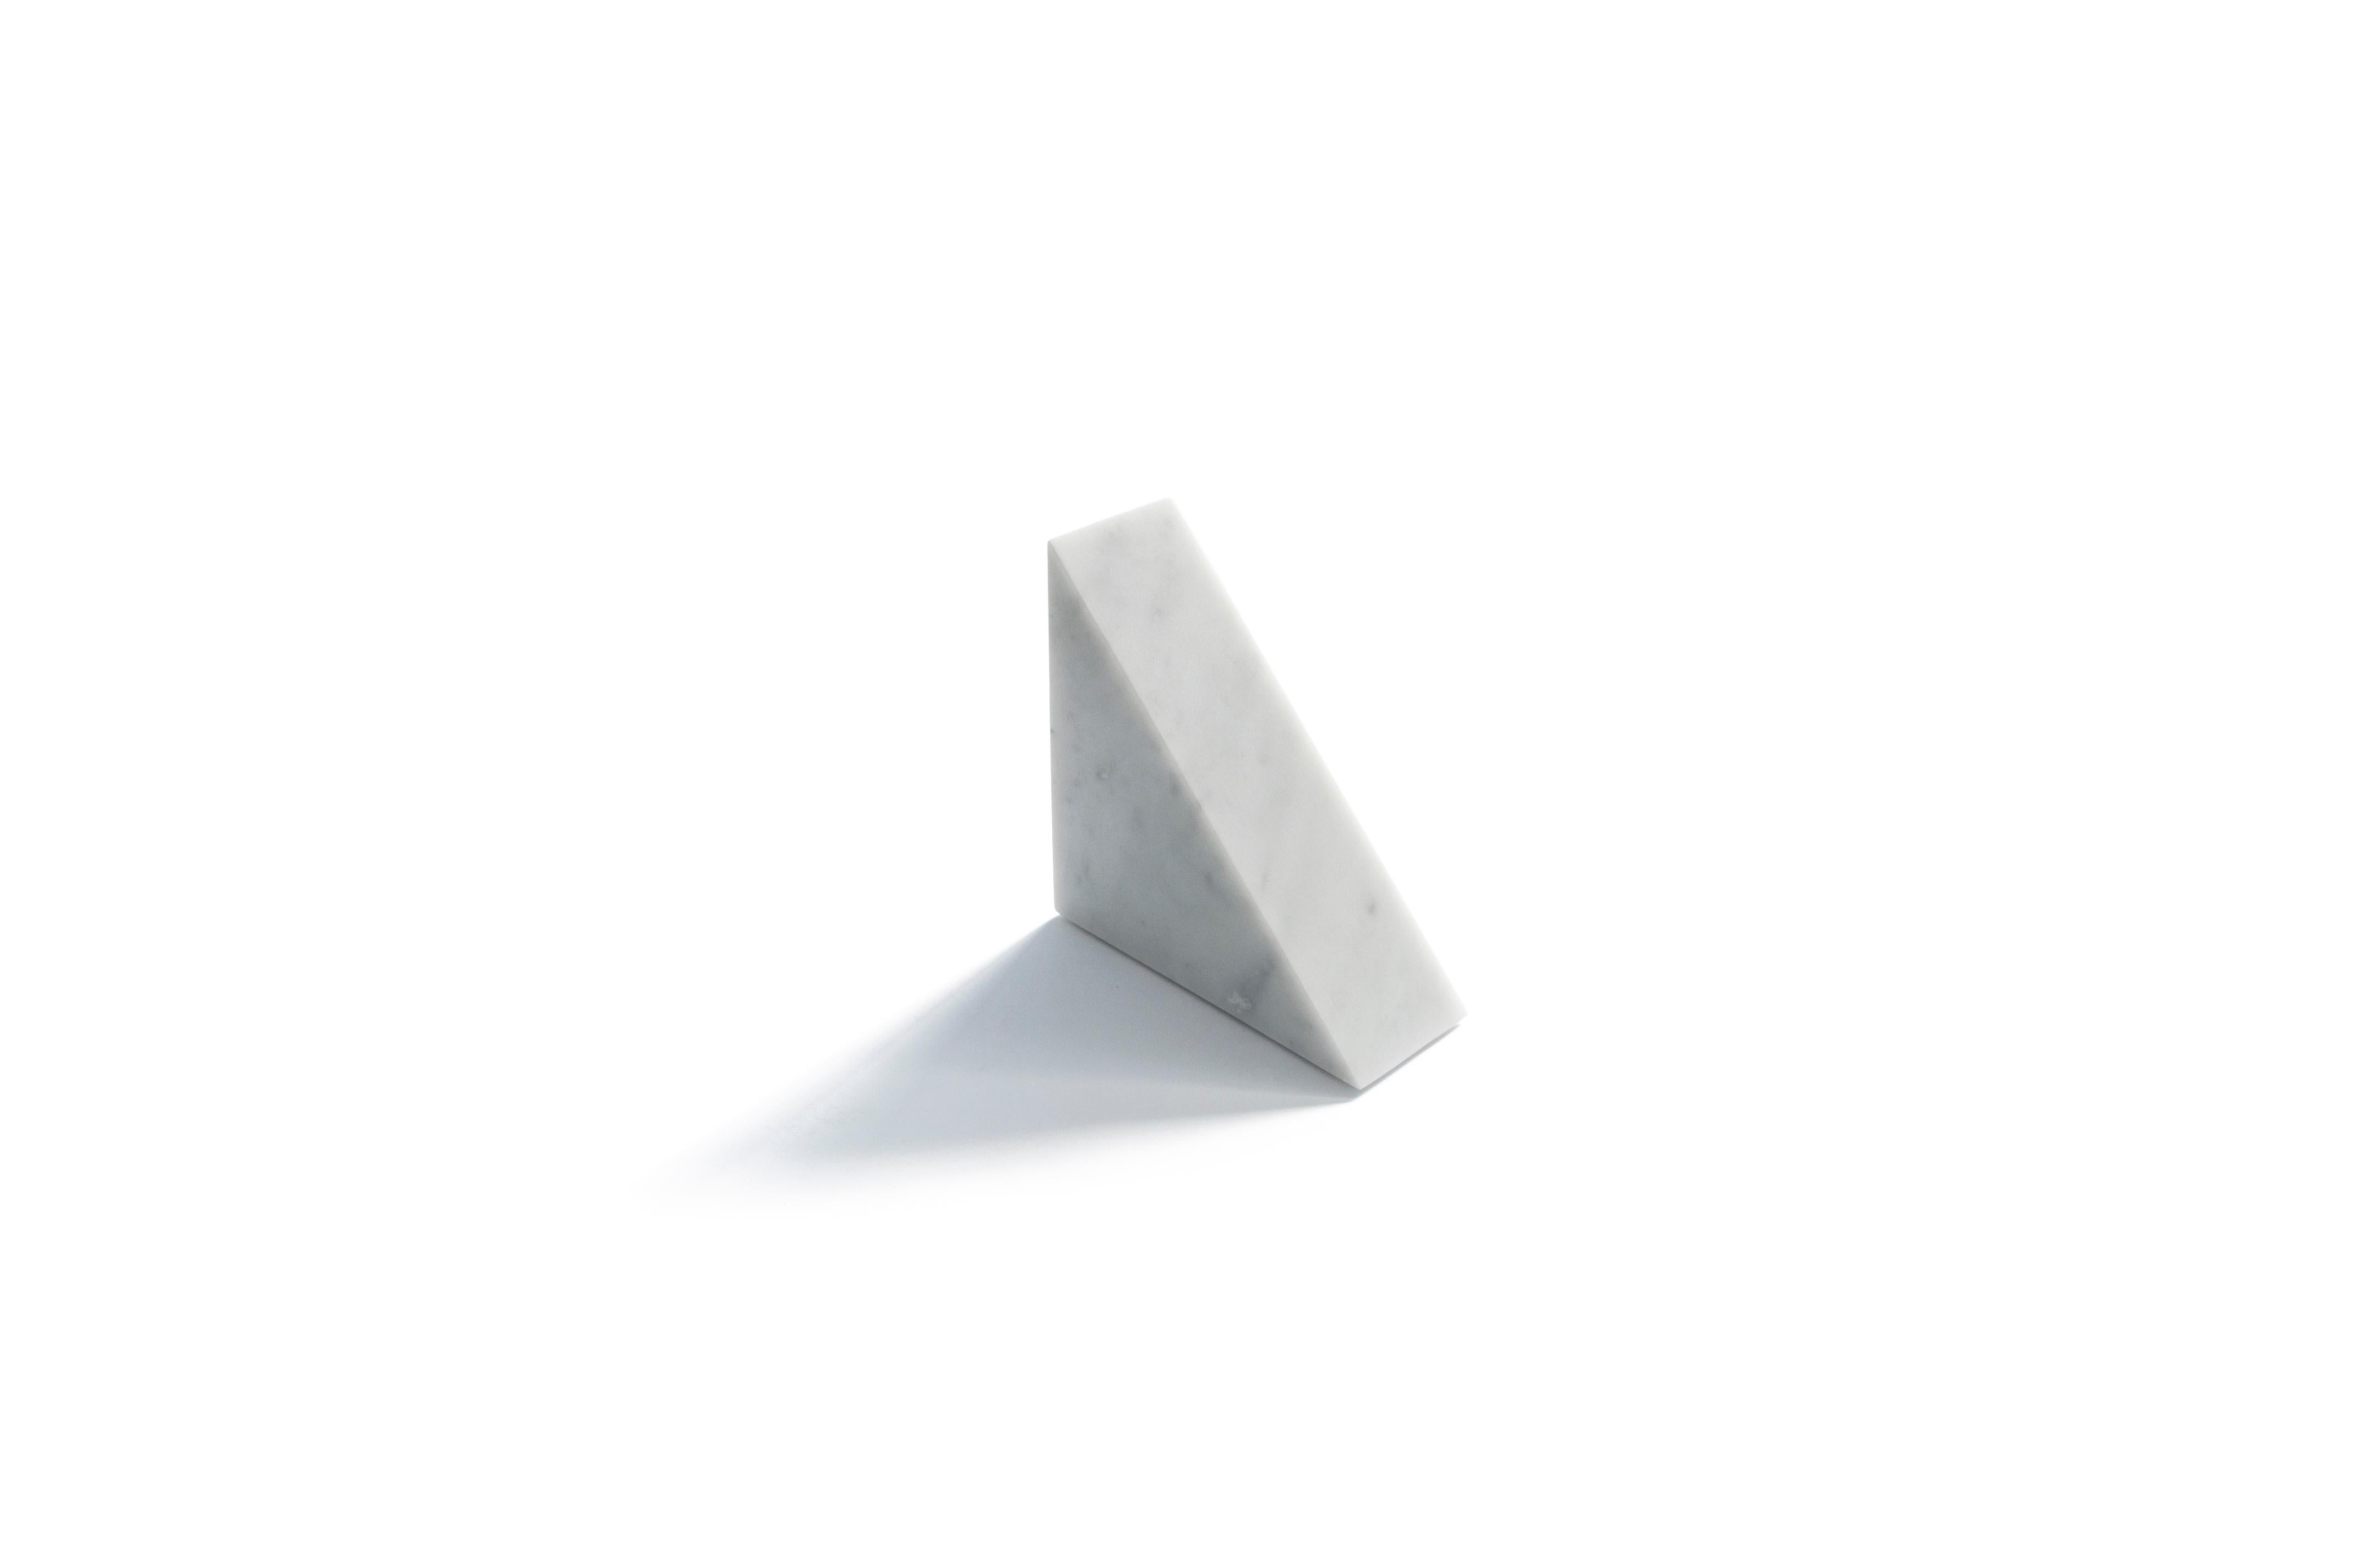 Big bookend or decorative object in satin white Carrara marble with triangular shape. Each piece is in a way unique (every marble block is different in veins and shades) and handmade by Italian artisans specialized over generations in processing